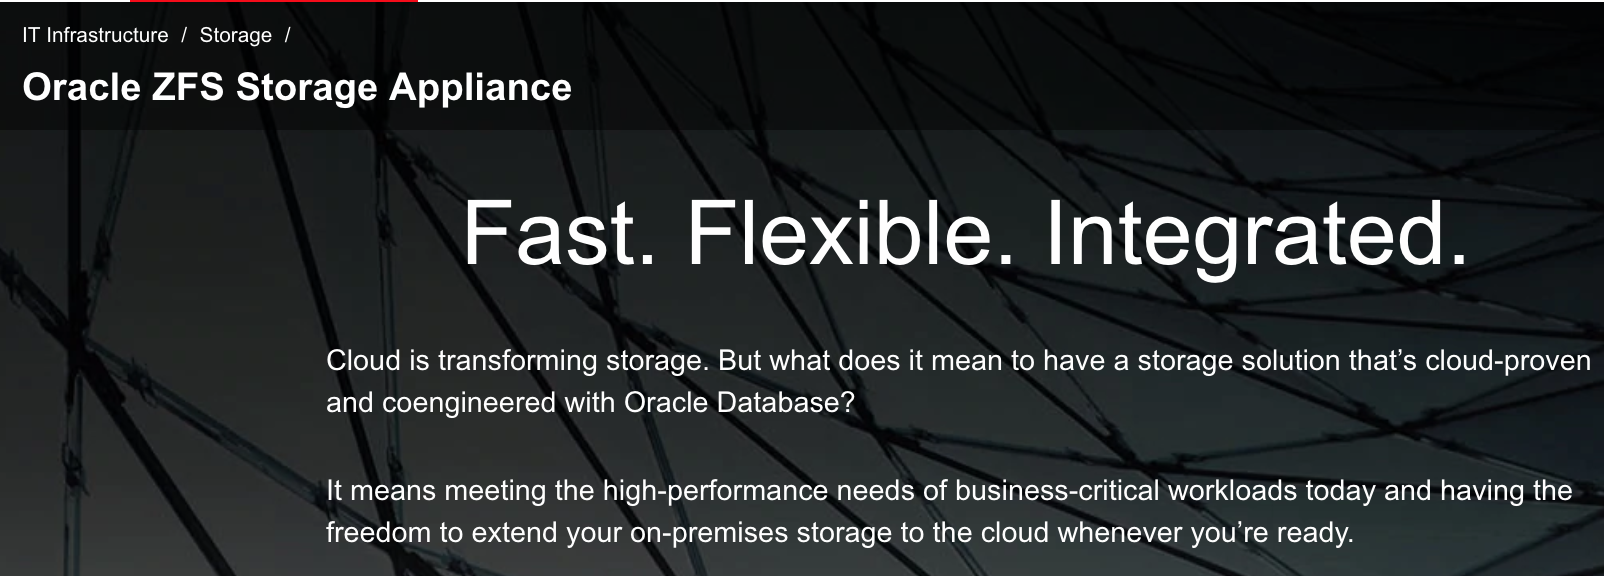 Oracle ZFS Storage Appliance provides the performance and flexibility you need to meet current requirements and be ready for the cloud.